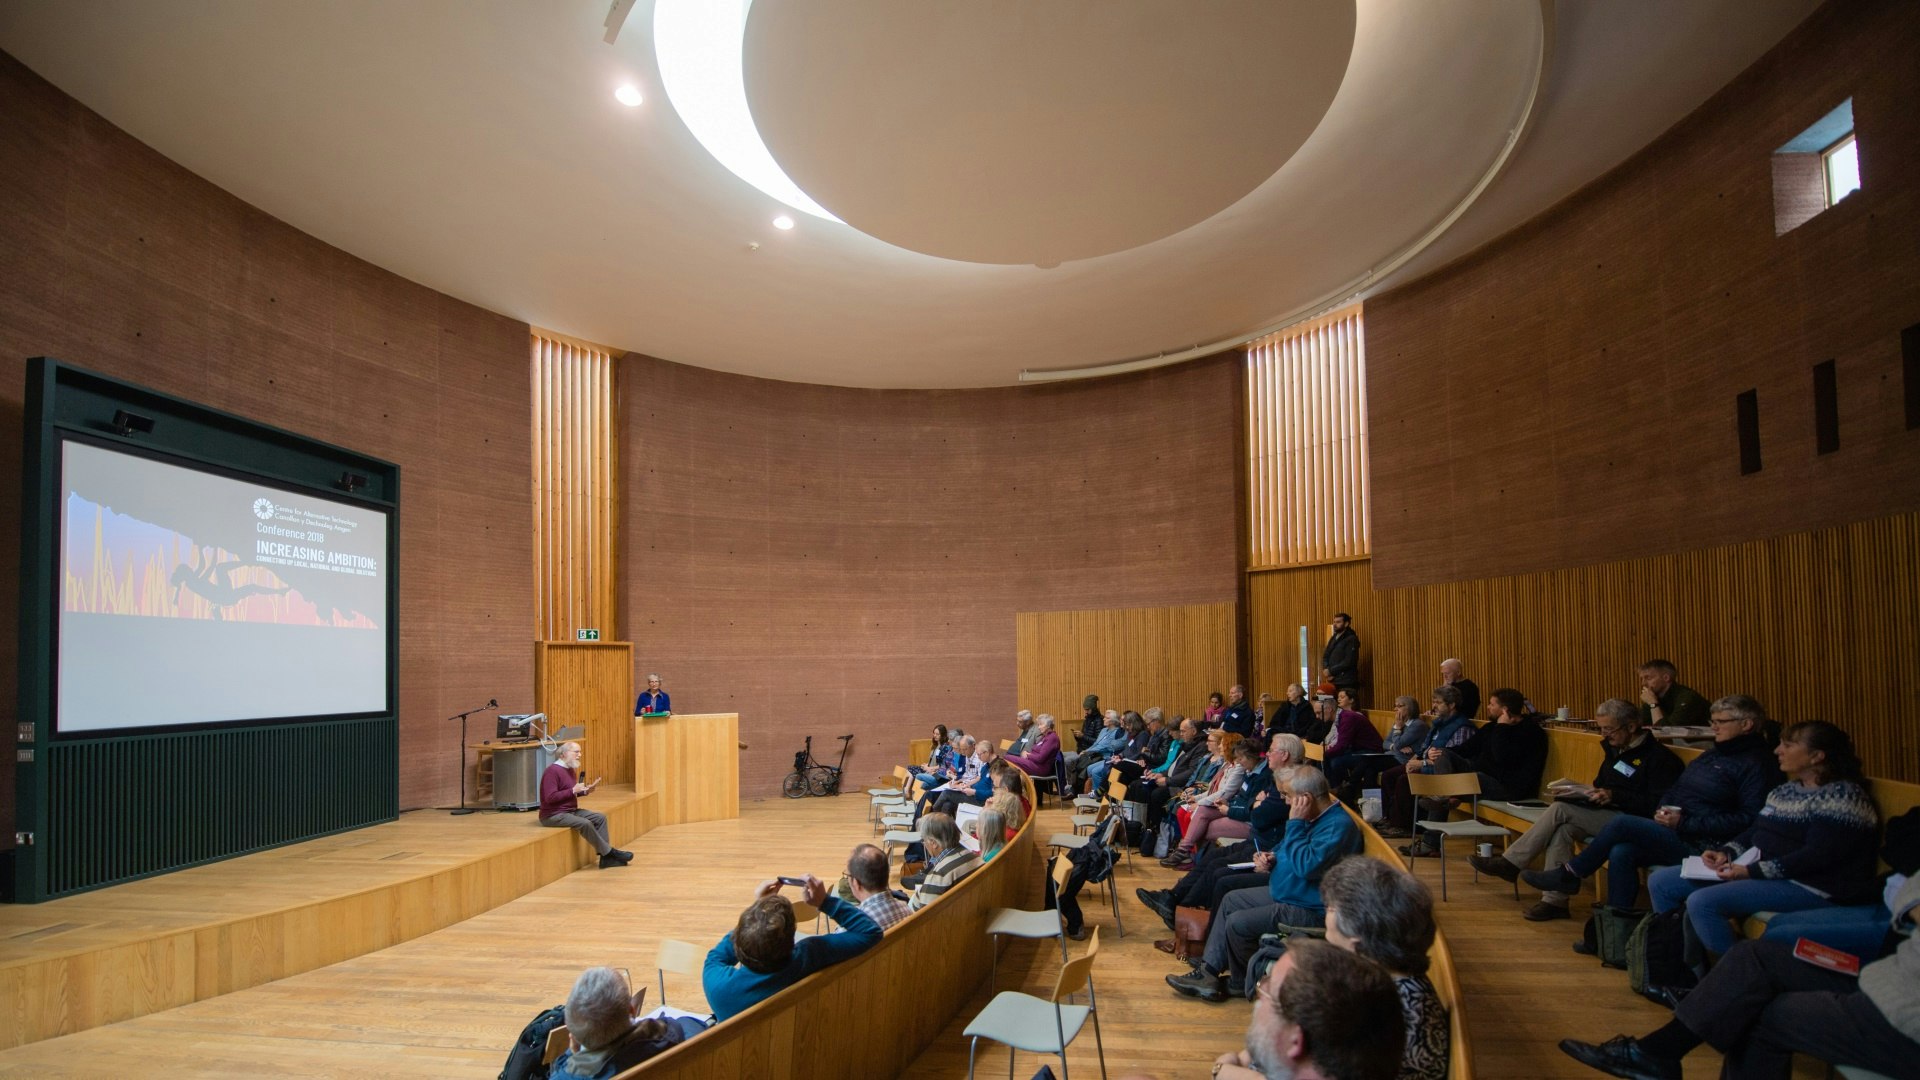 Rammed Earth lecture theatre at Graduate School of the Environment